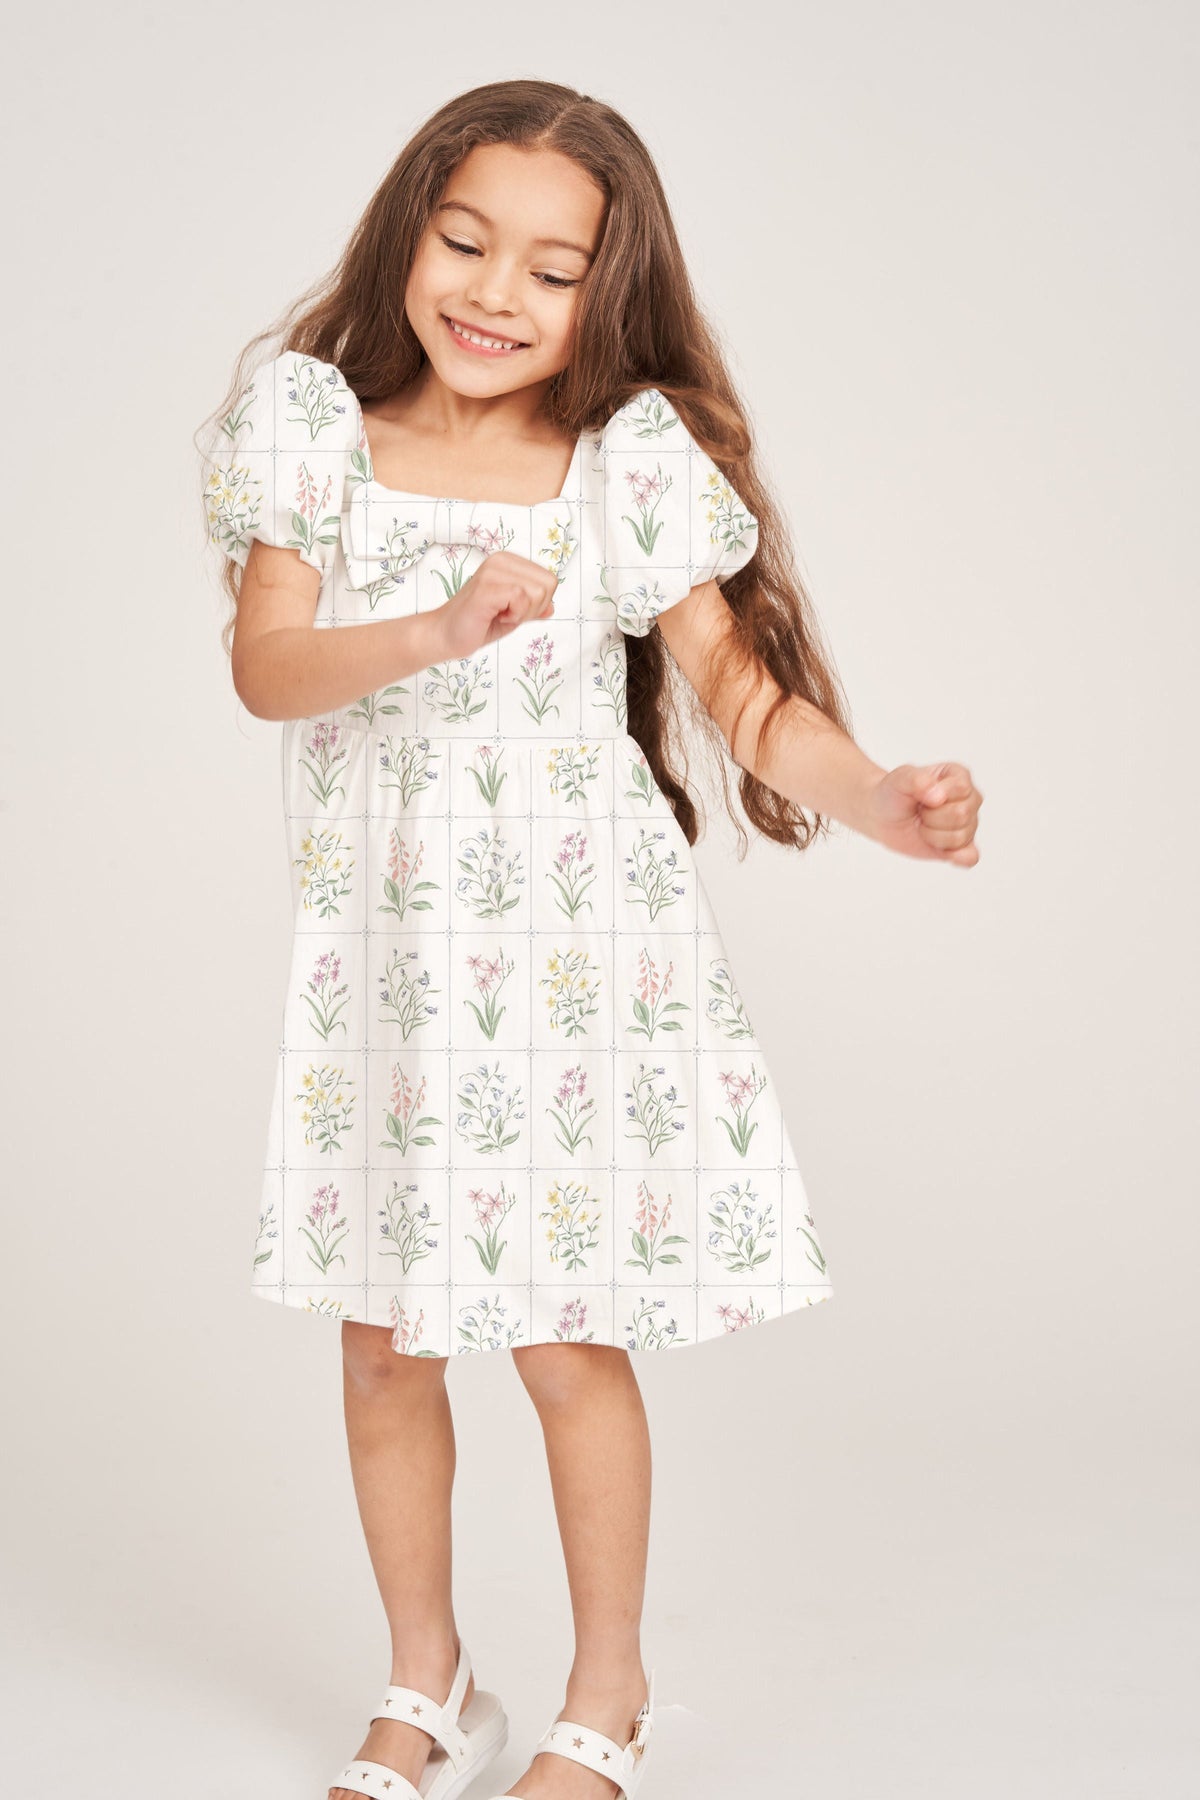 The Kylie Girl Dress in Tuscan Garden Floral